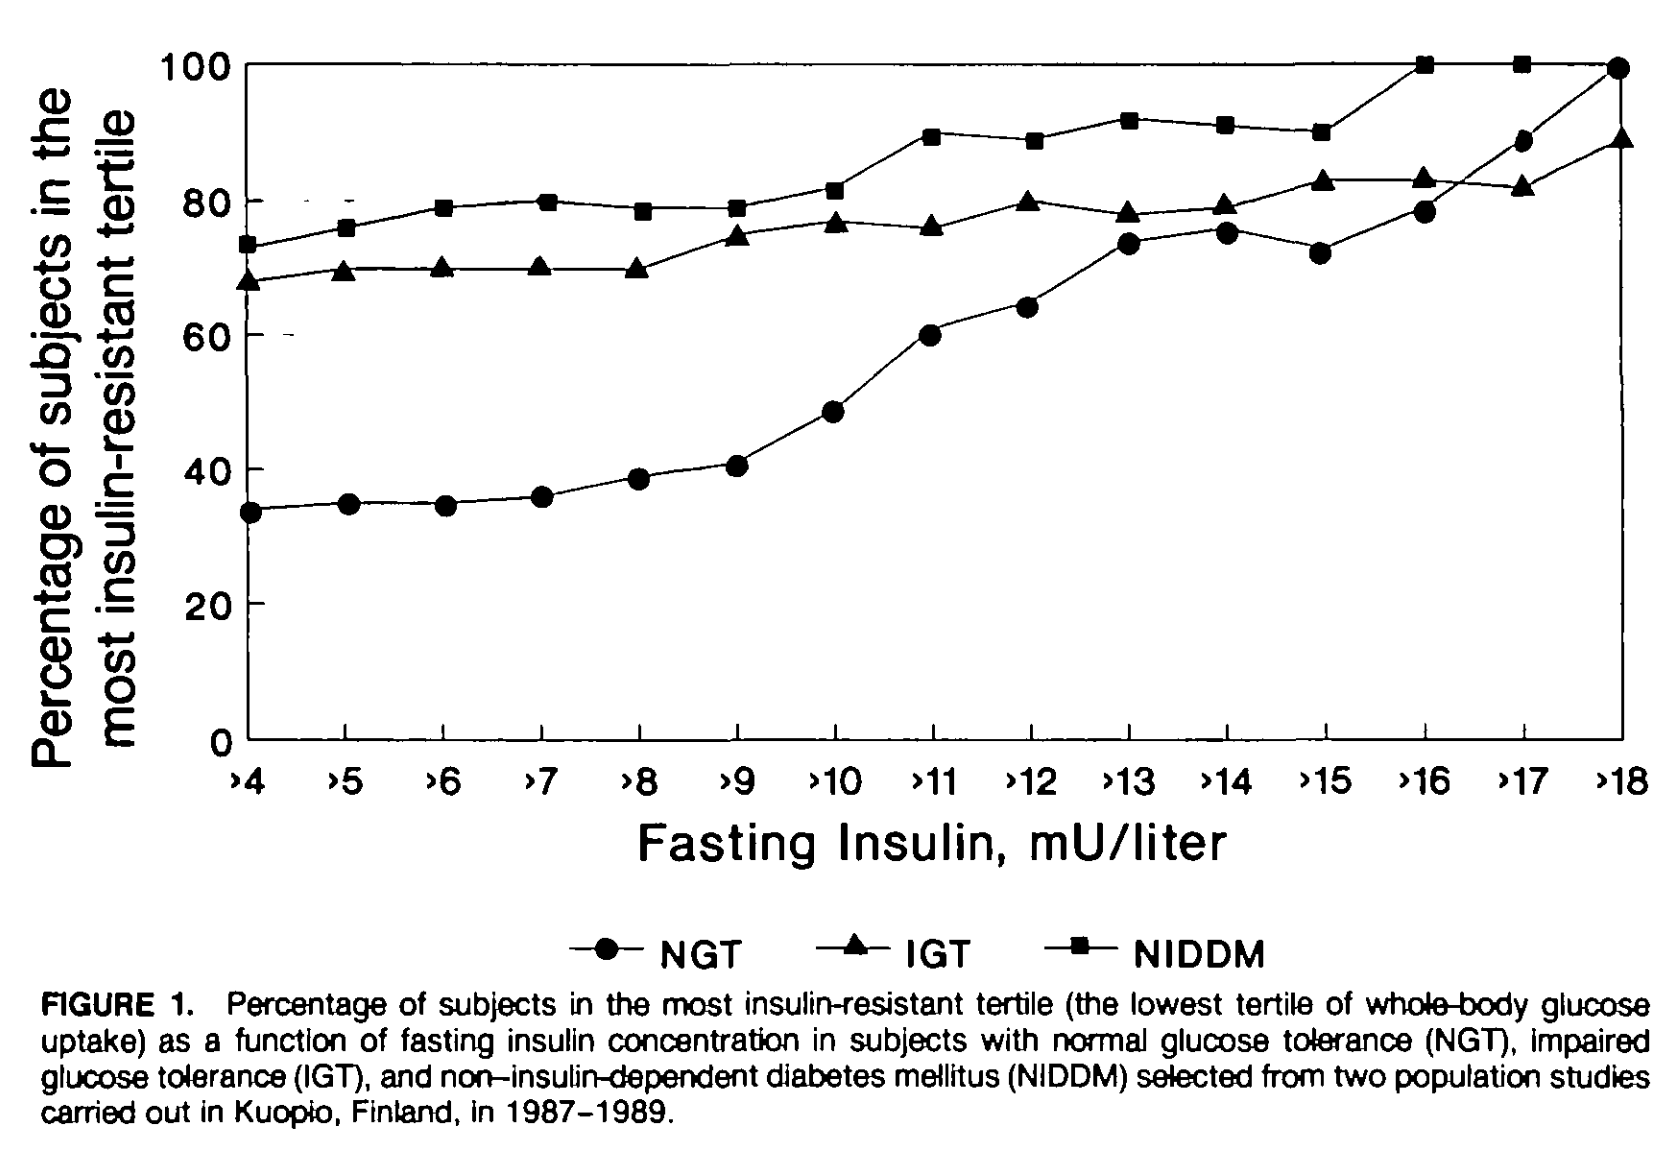 Percentage of subjects in the most insulin-resistant tertile by fasting insulin level